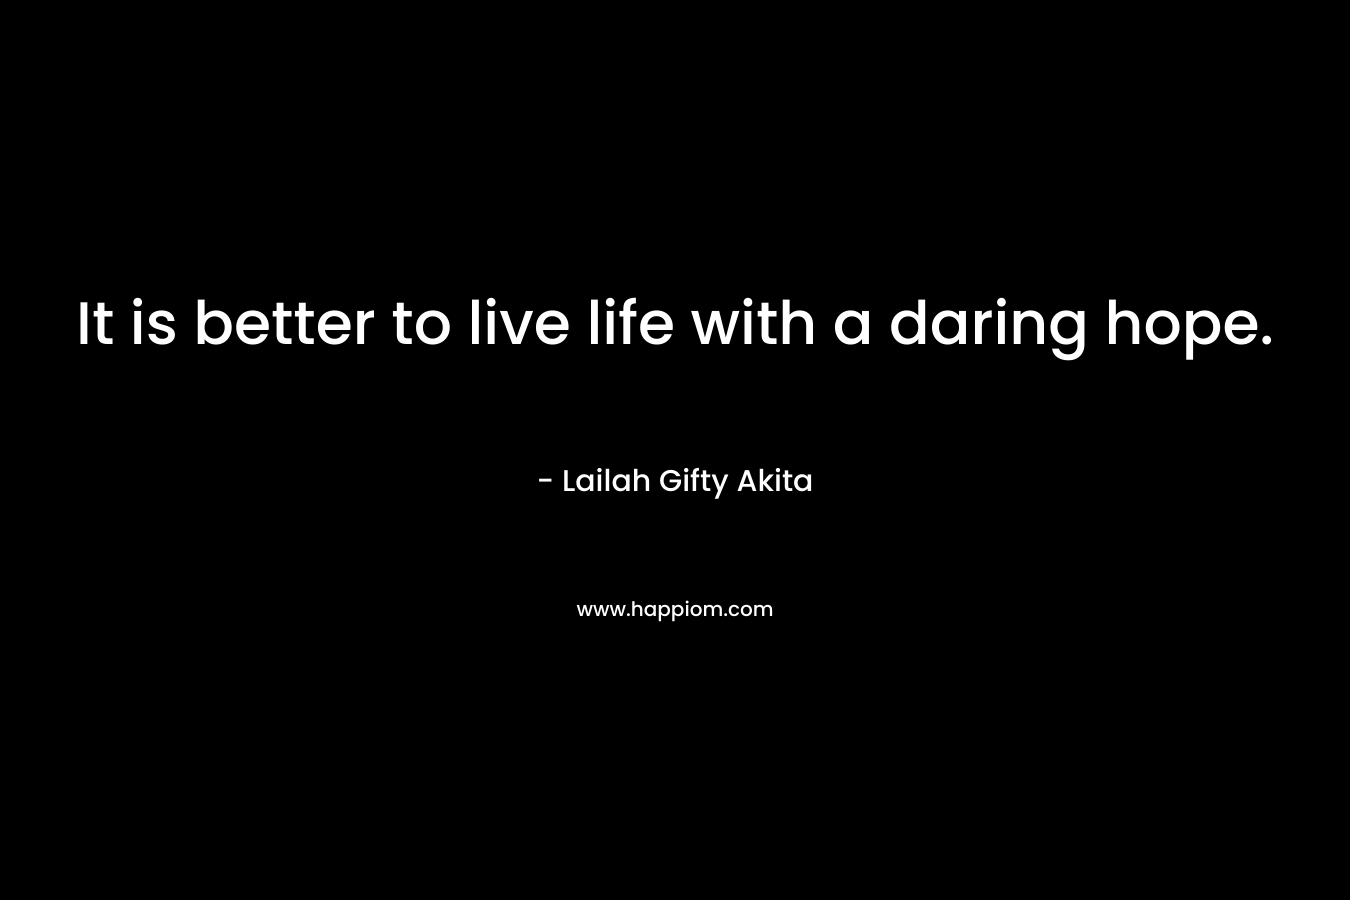 It is better to live life with a daring hope.